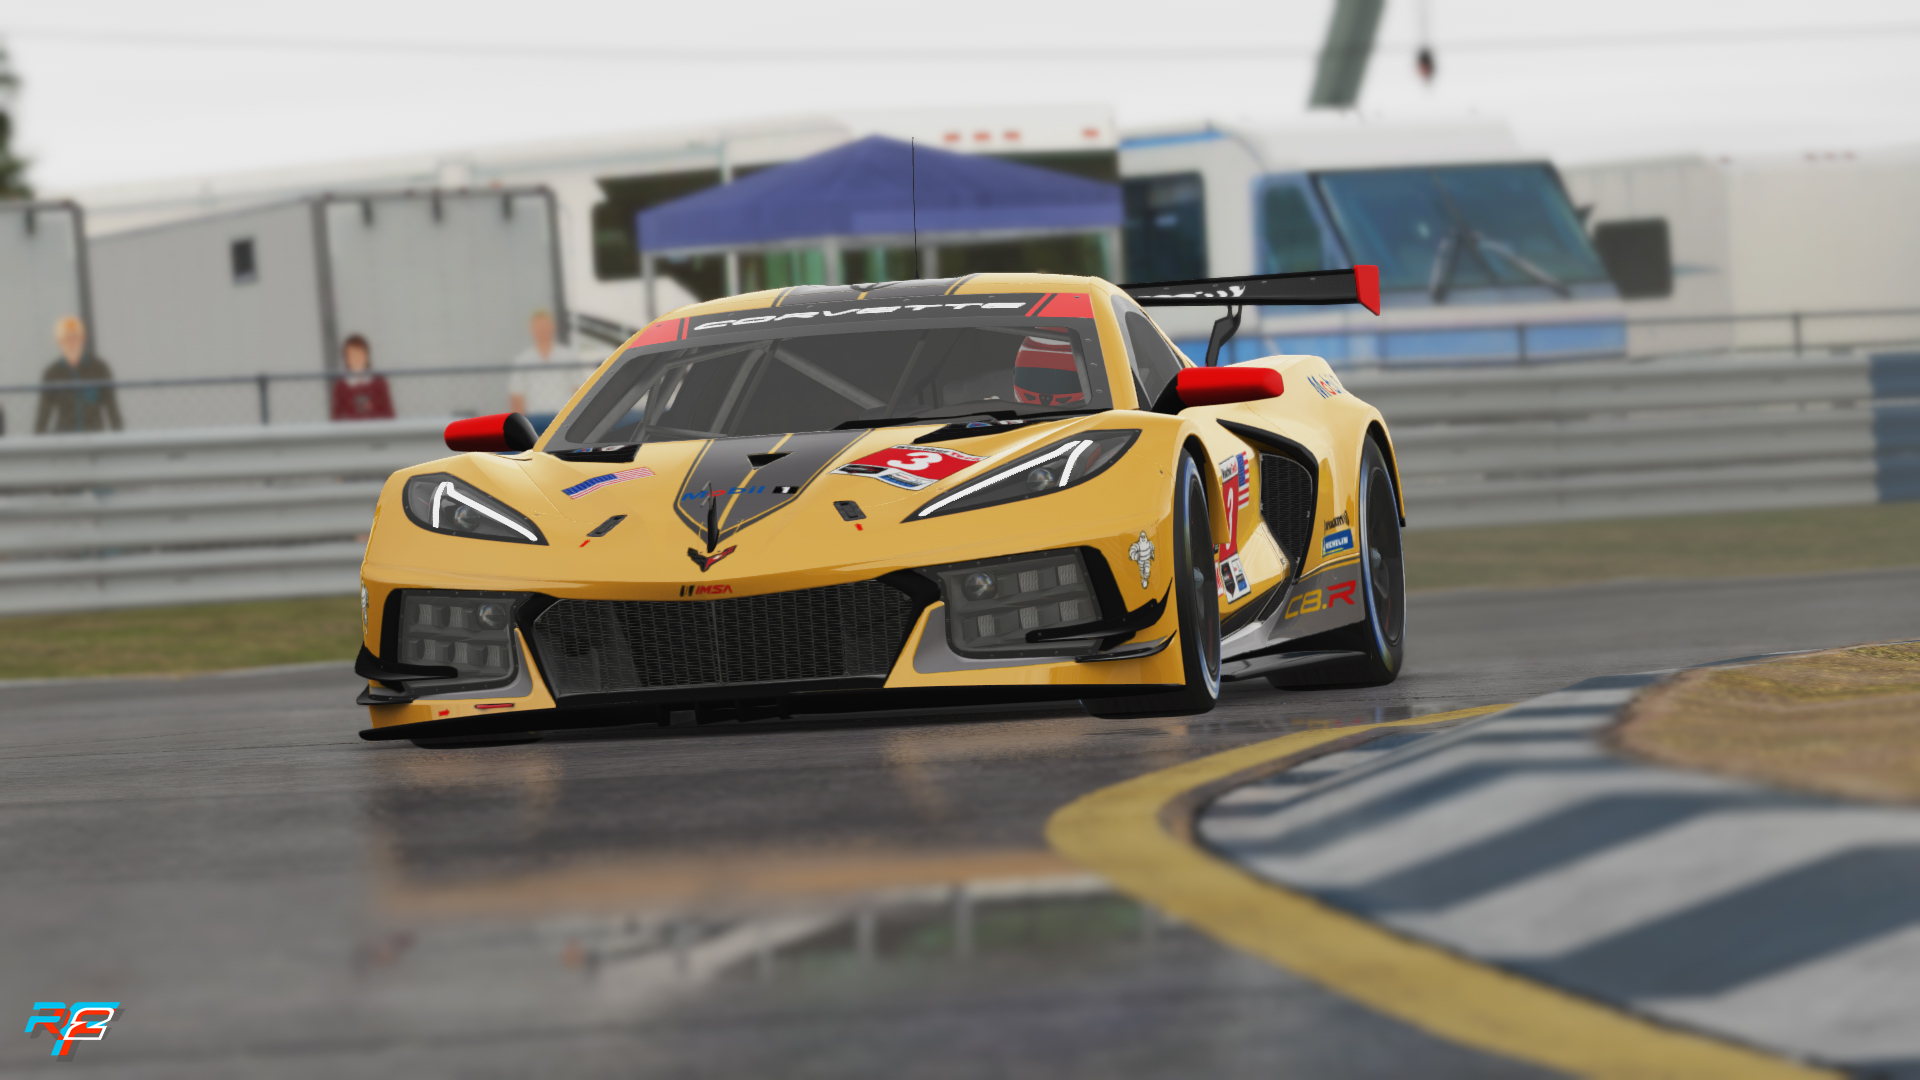 More information about "rFactor 2: nuova Release Candidate Giugno 2021"